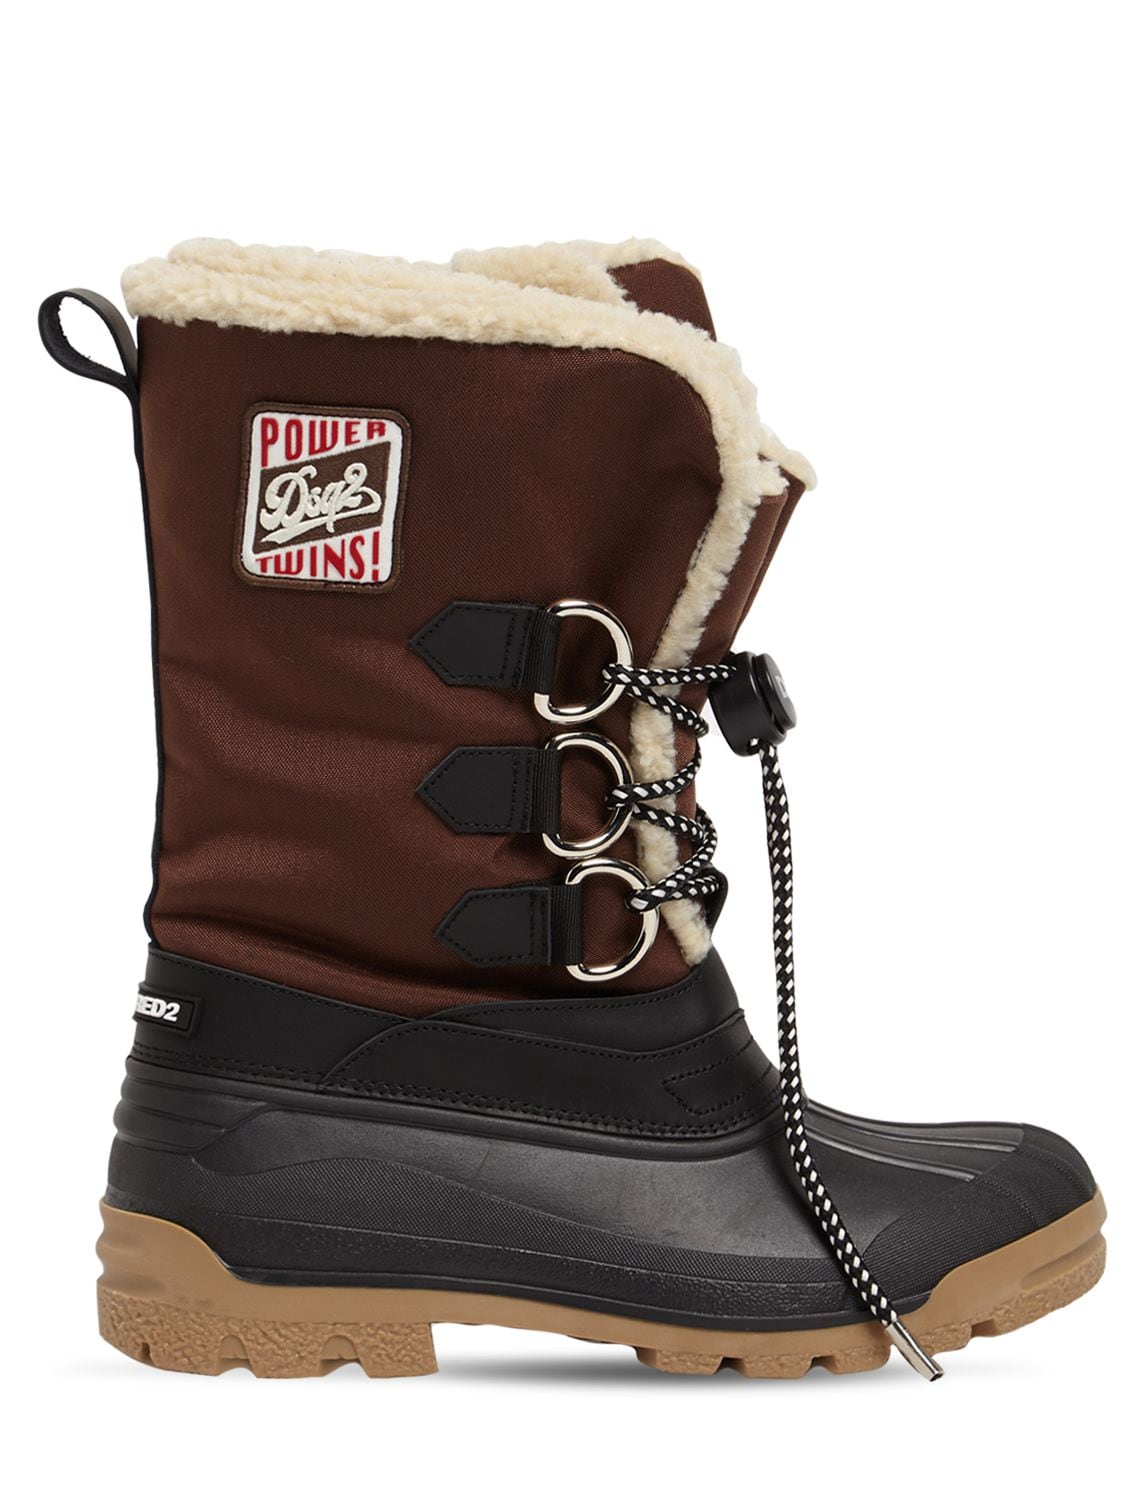 Nylon Duck Snow Boots W/ Patch